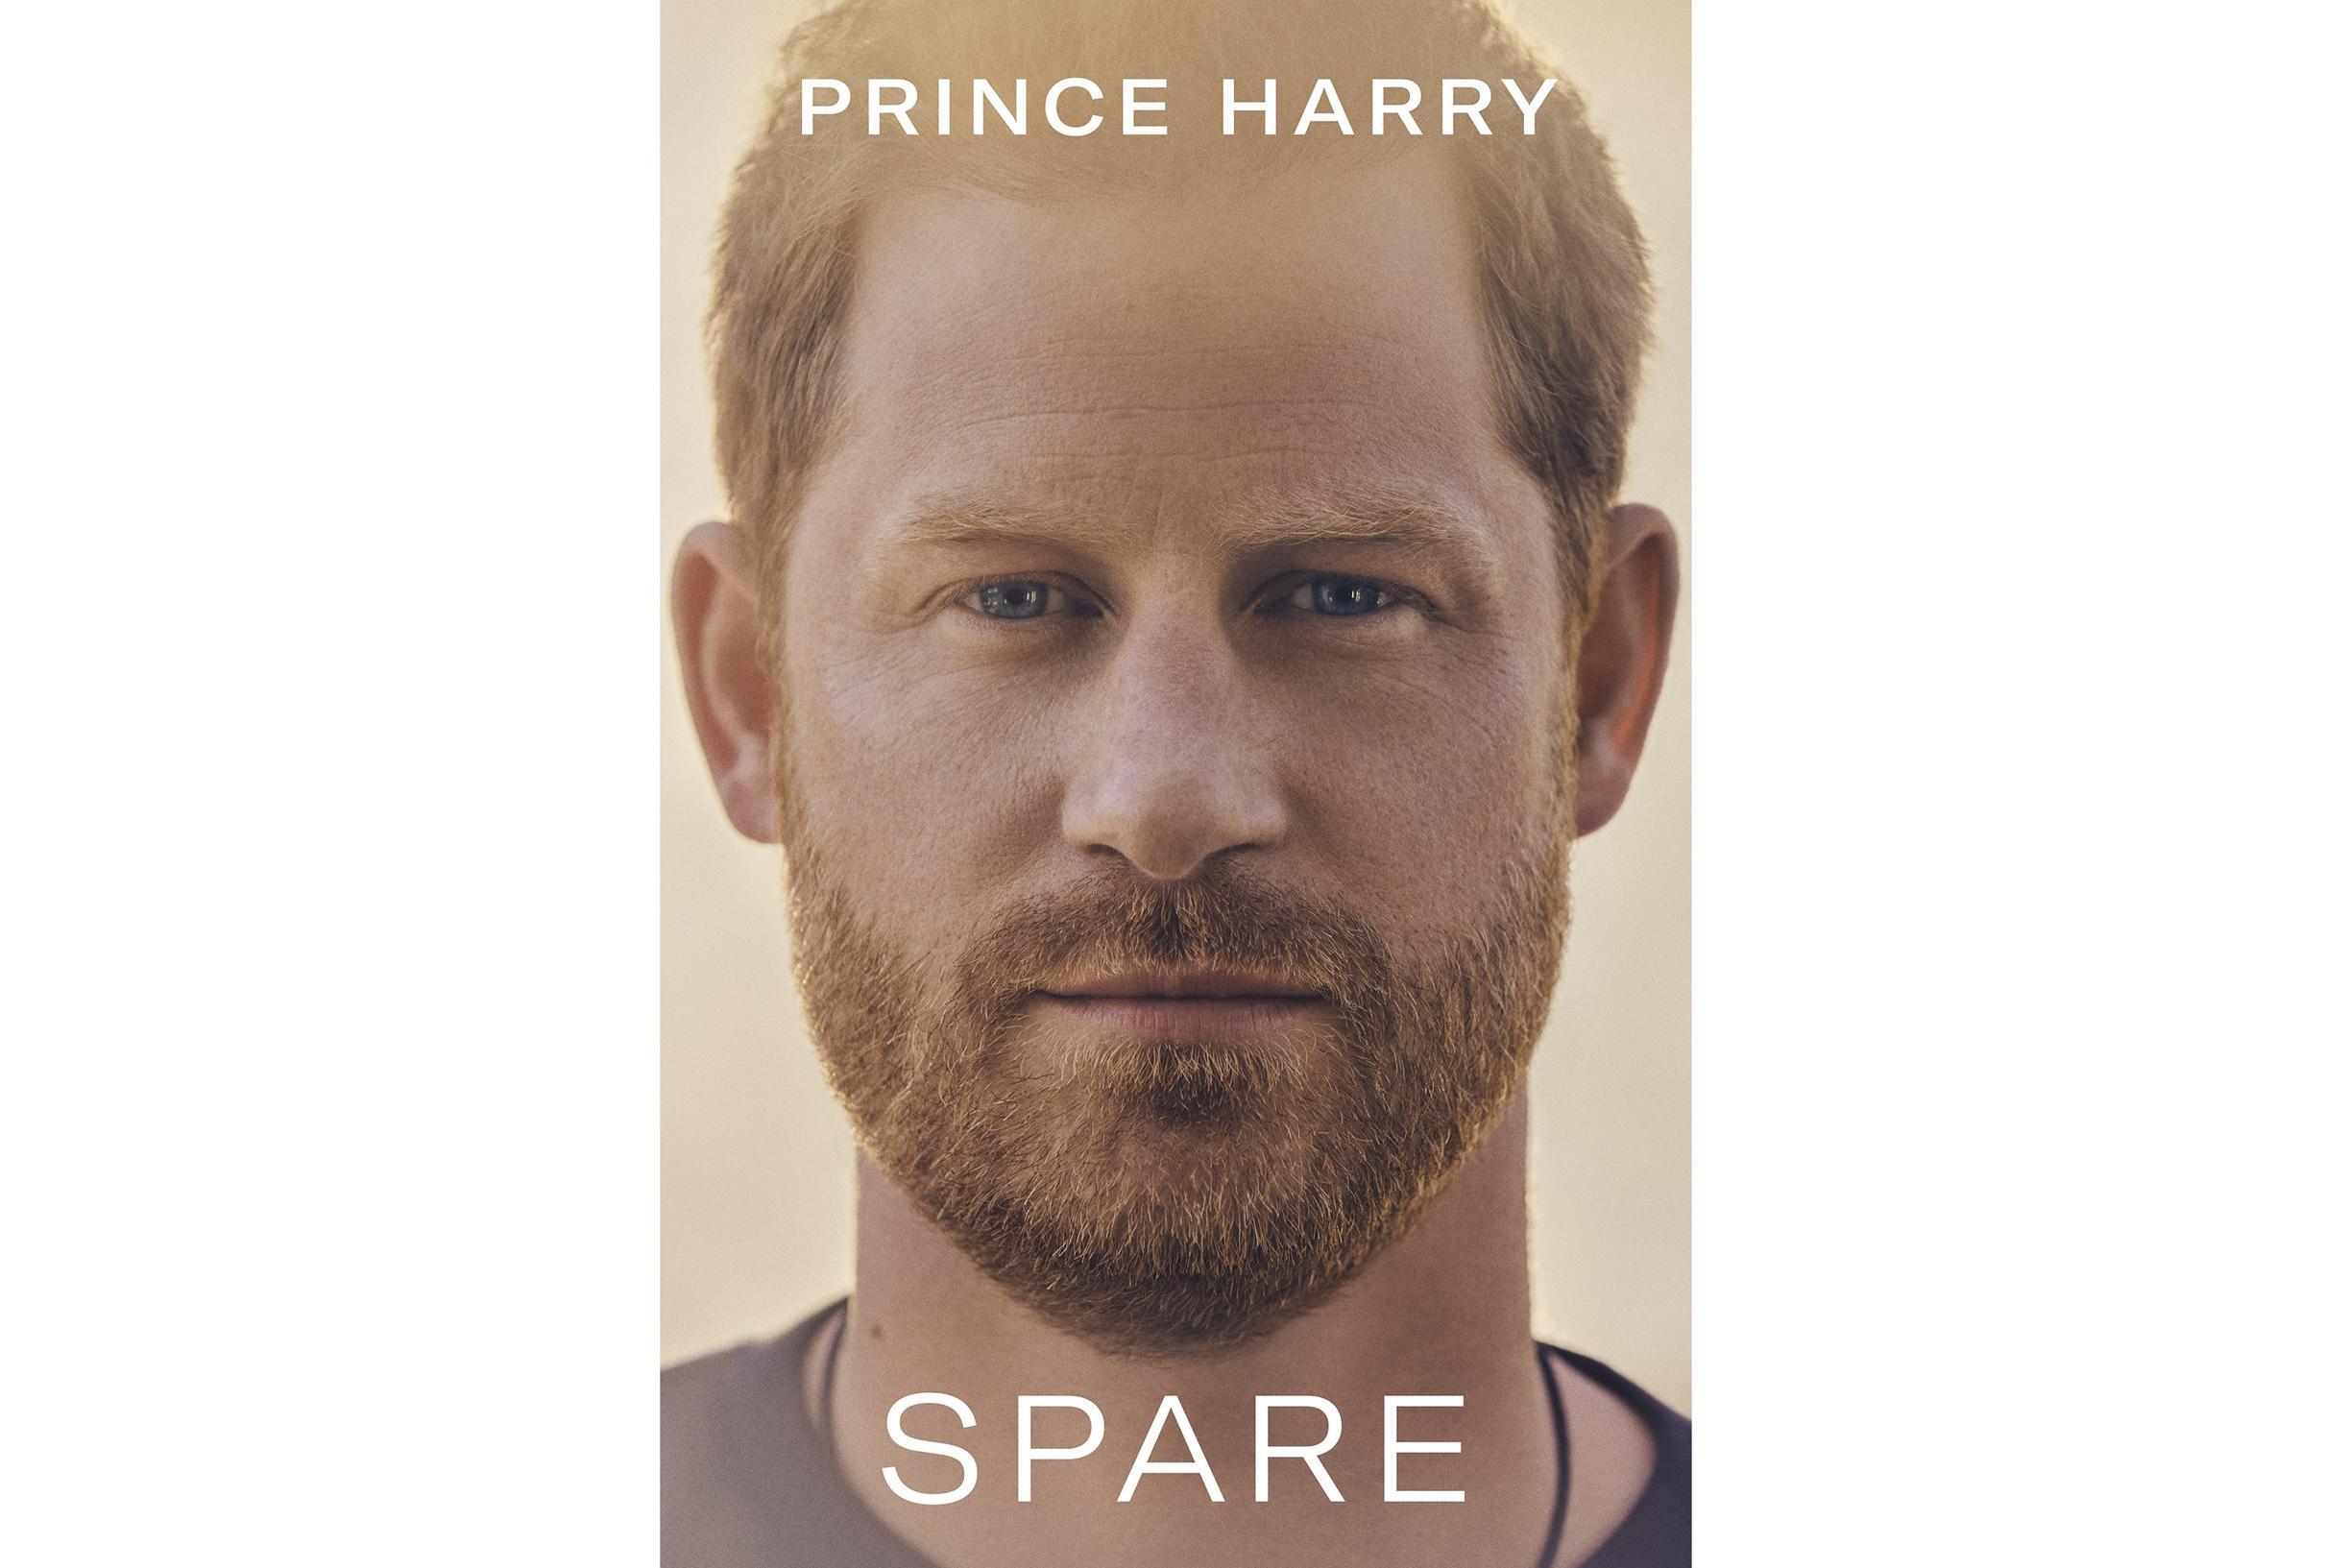 Prince Harry’s book is particularly difficult for brother William: ‘I don’t see how they can reconcile after this’